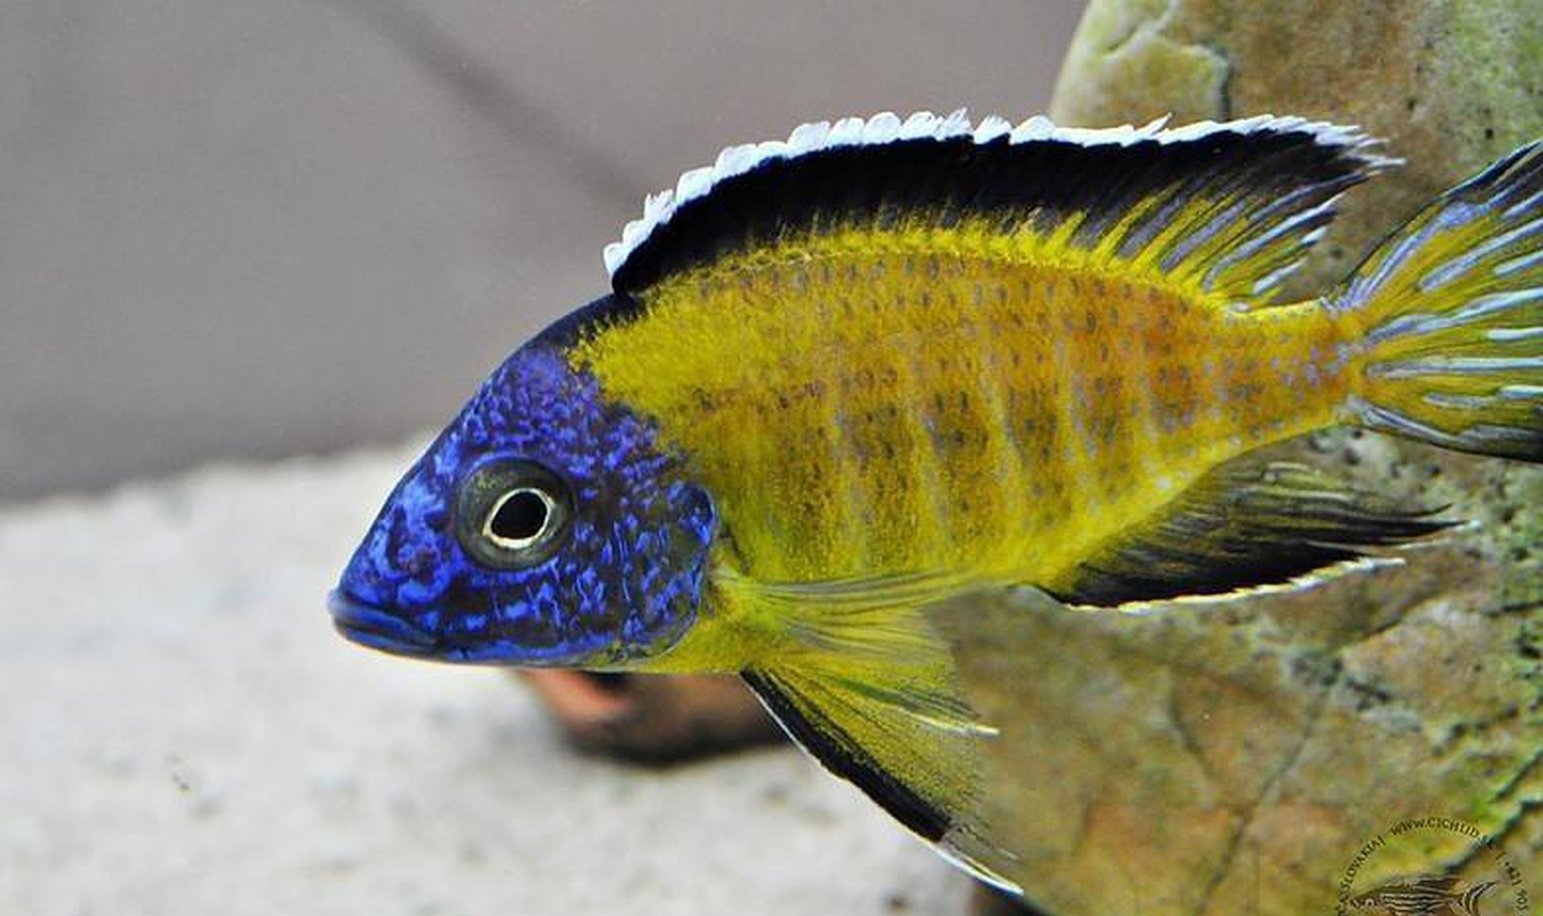 X2 Flavescent Peacock Cichlids - Large 4" - 6" - Freshwater-Freshwater Fish Package-www.YourFishStore.com